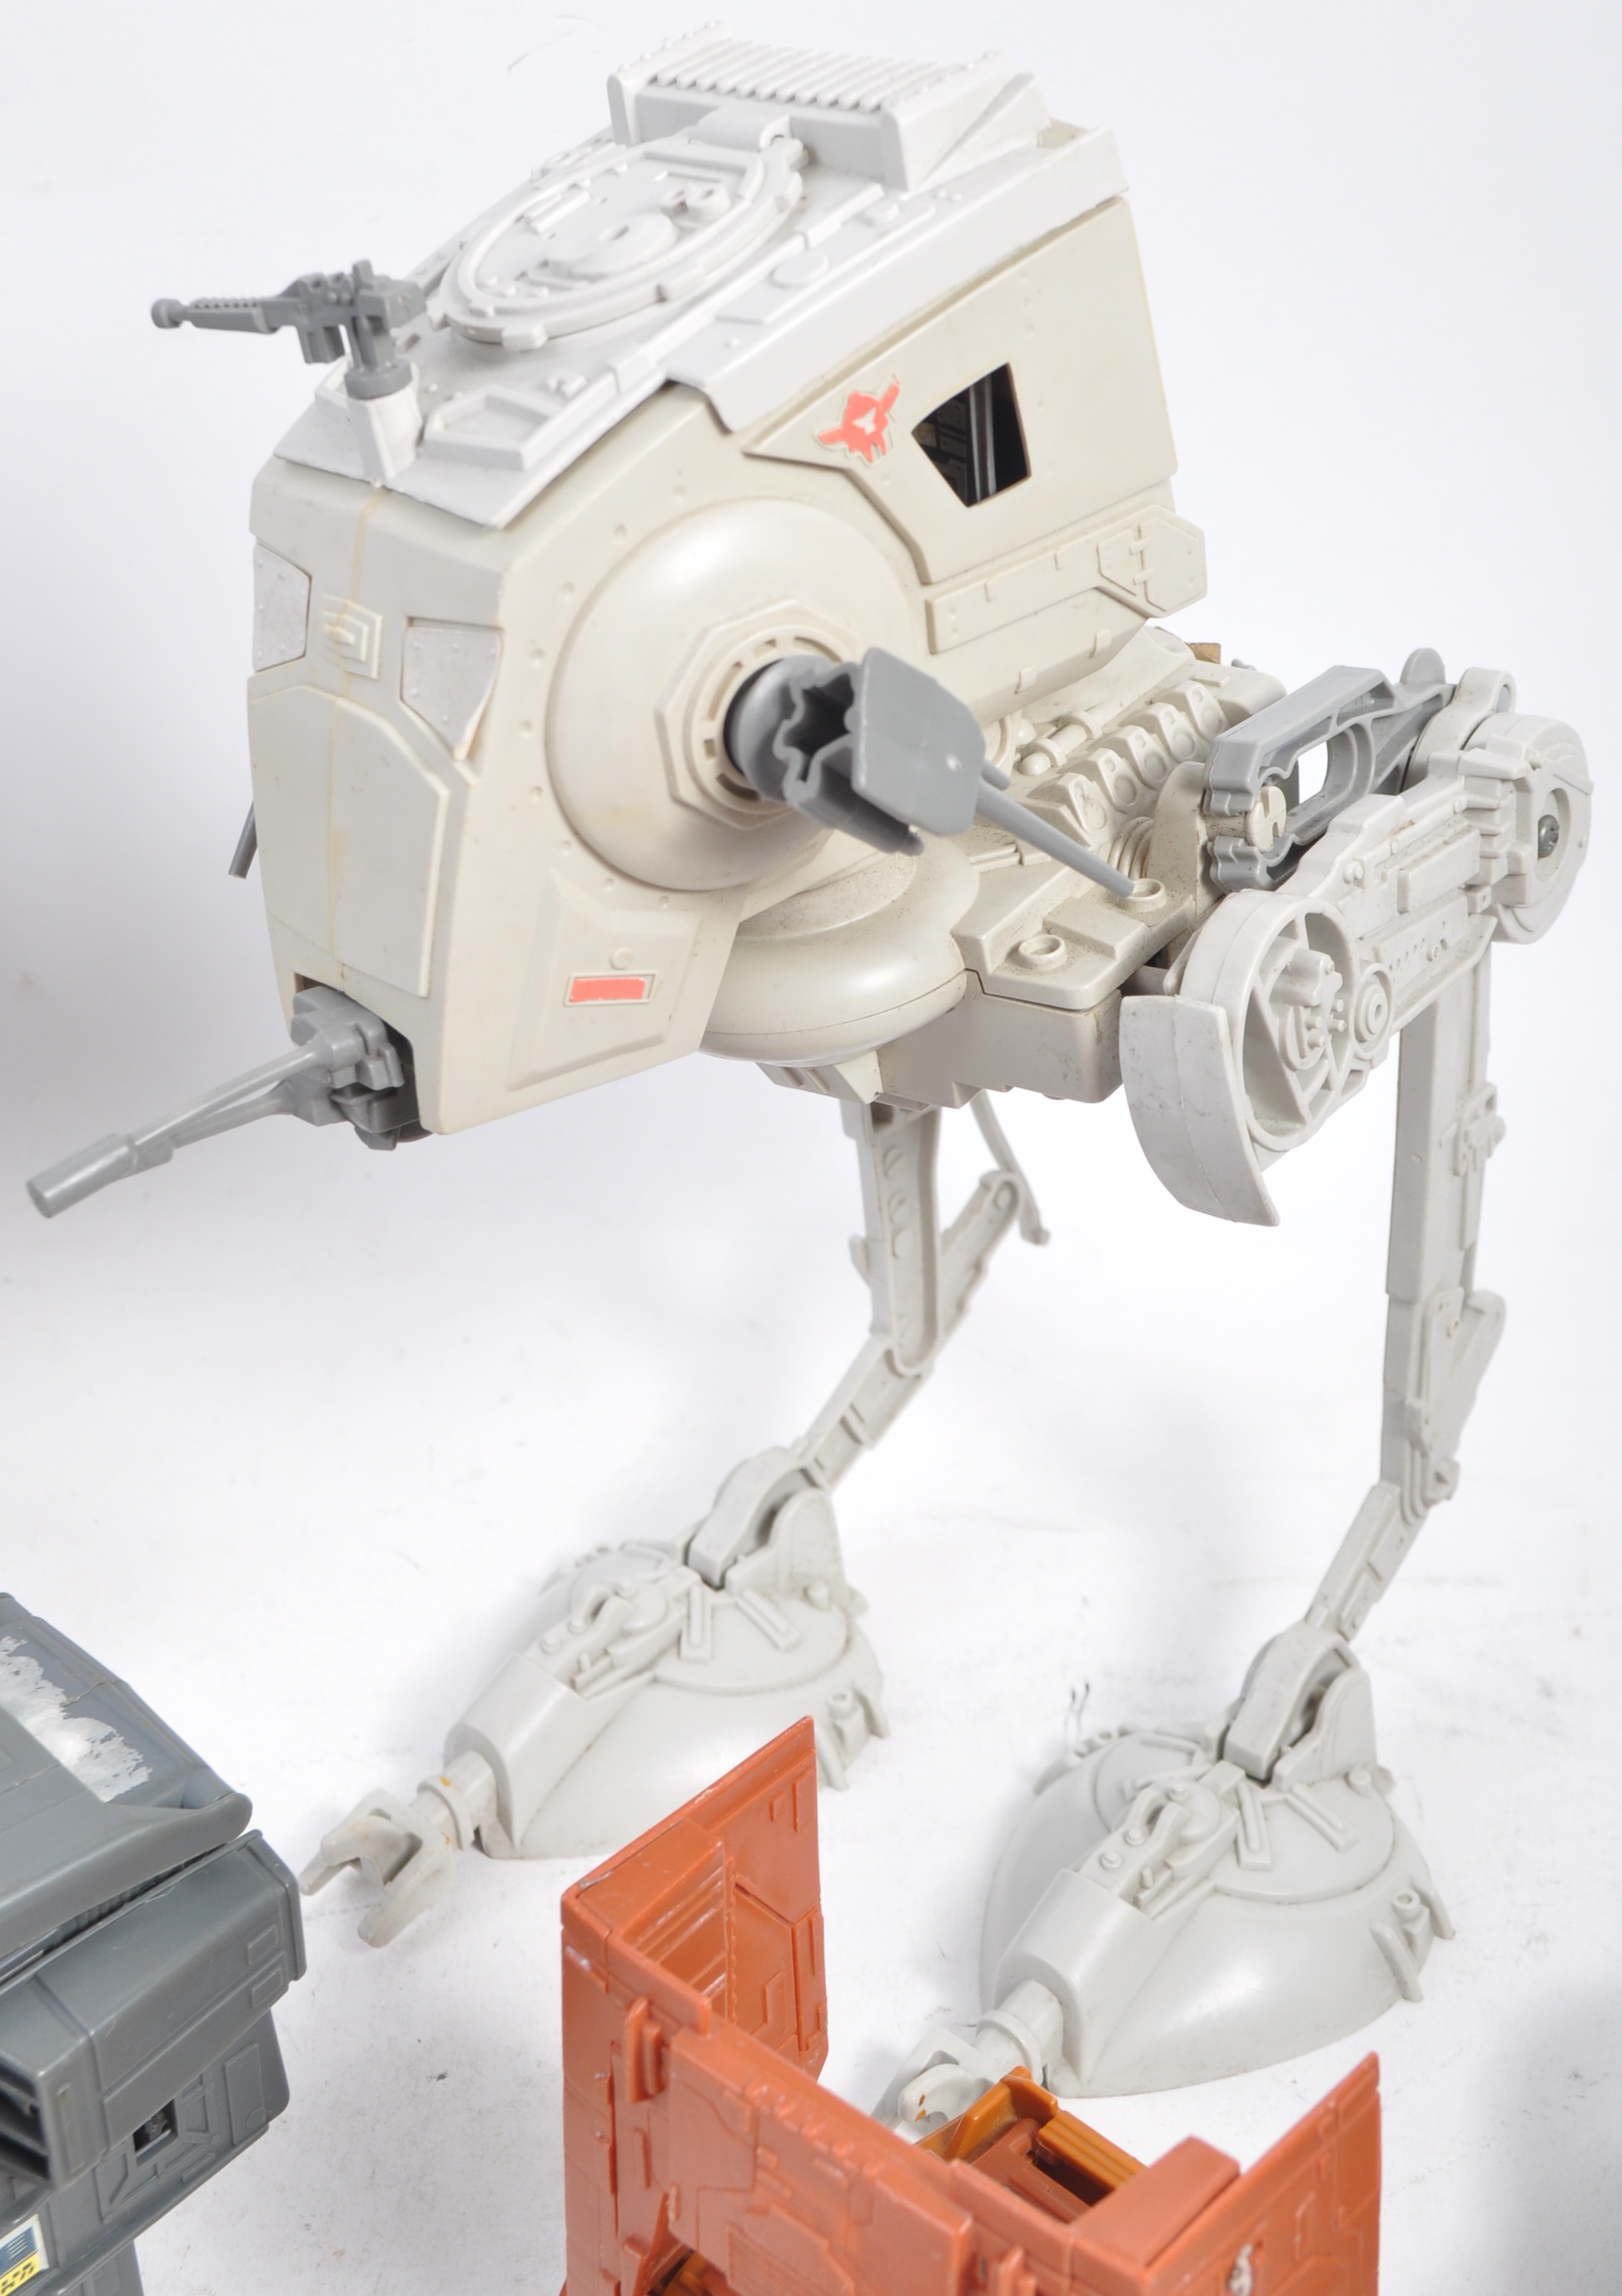 COLLECTION OF VINTAGE PALITOY STAR WARS PLAYSET MINIRIGS - Image 4 of 7